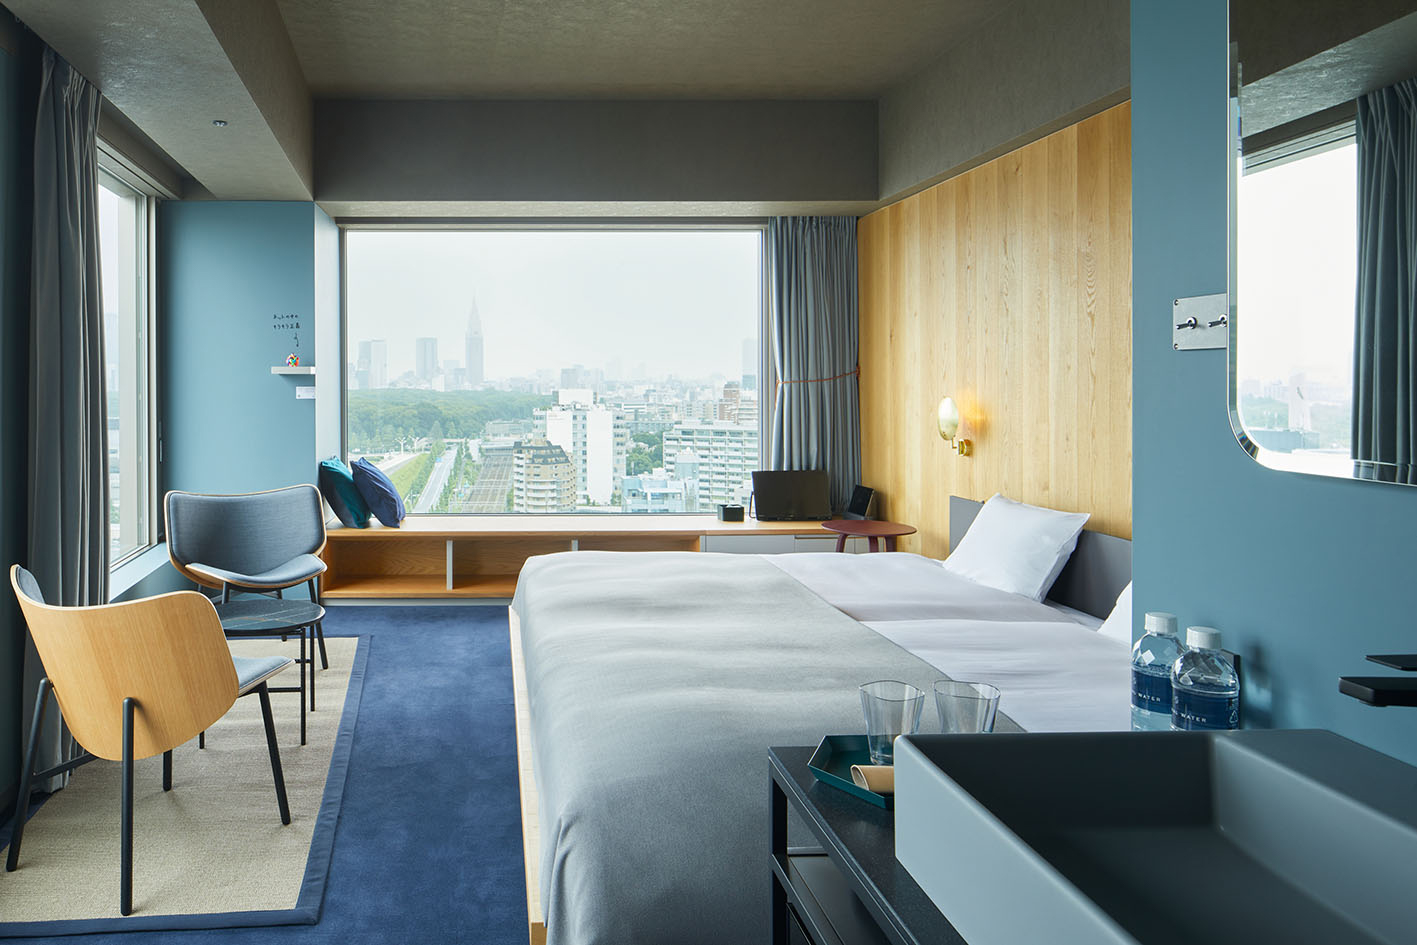 A panoramic view of Shibuya from a stylish room